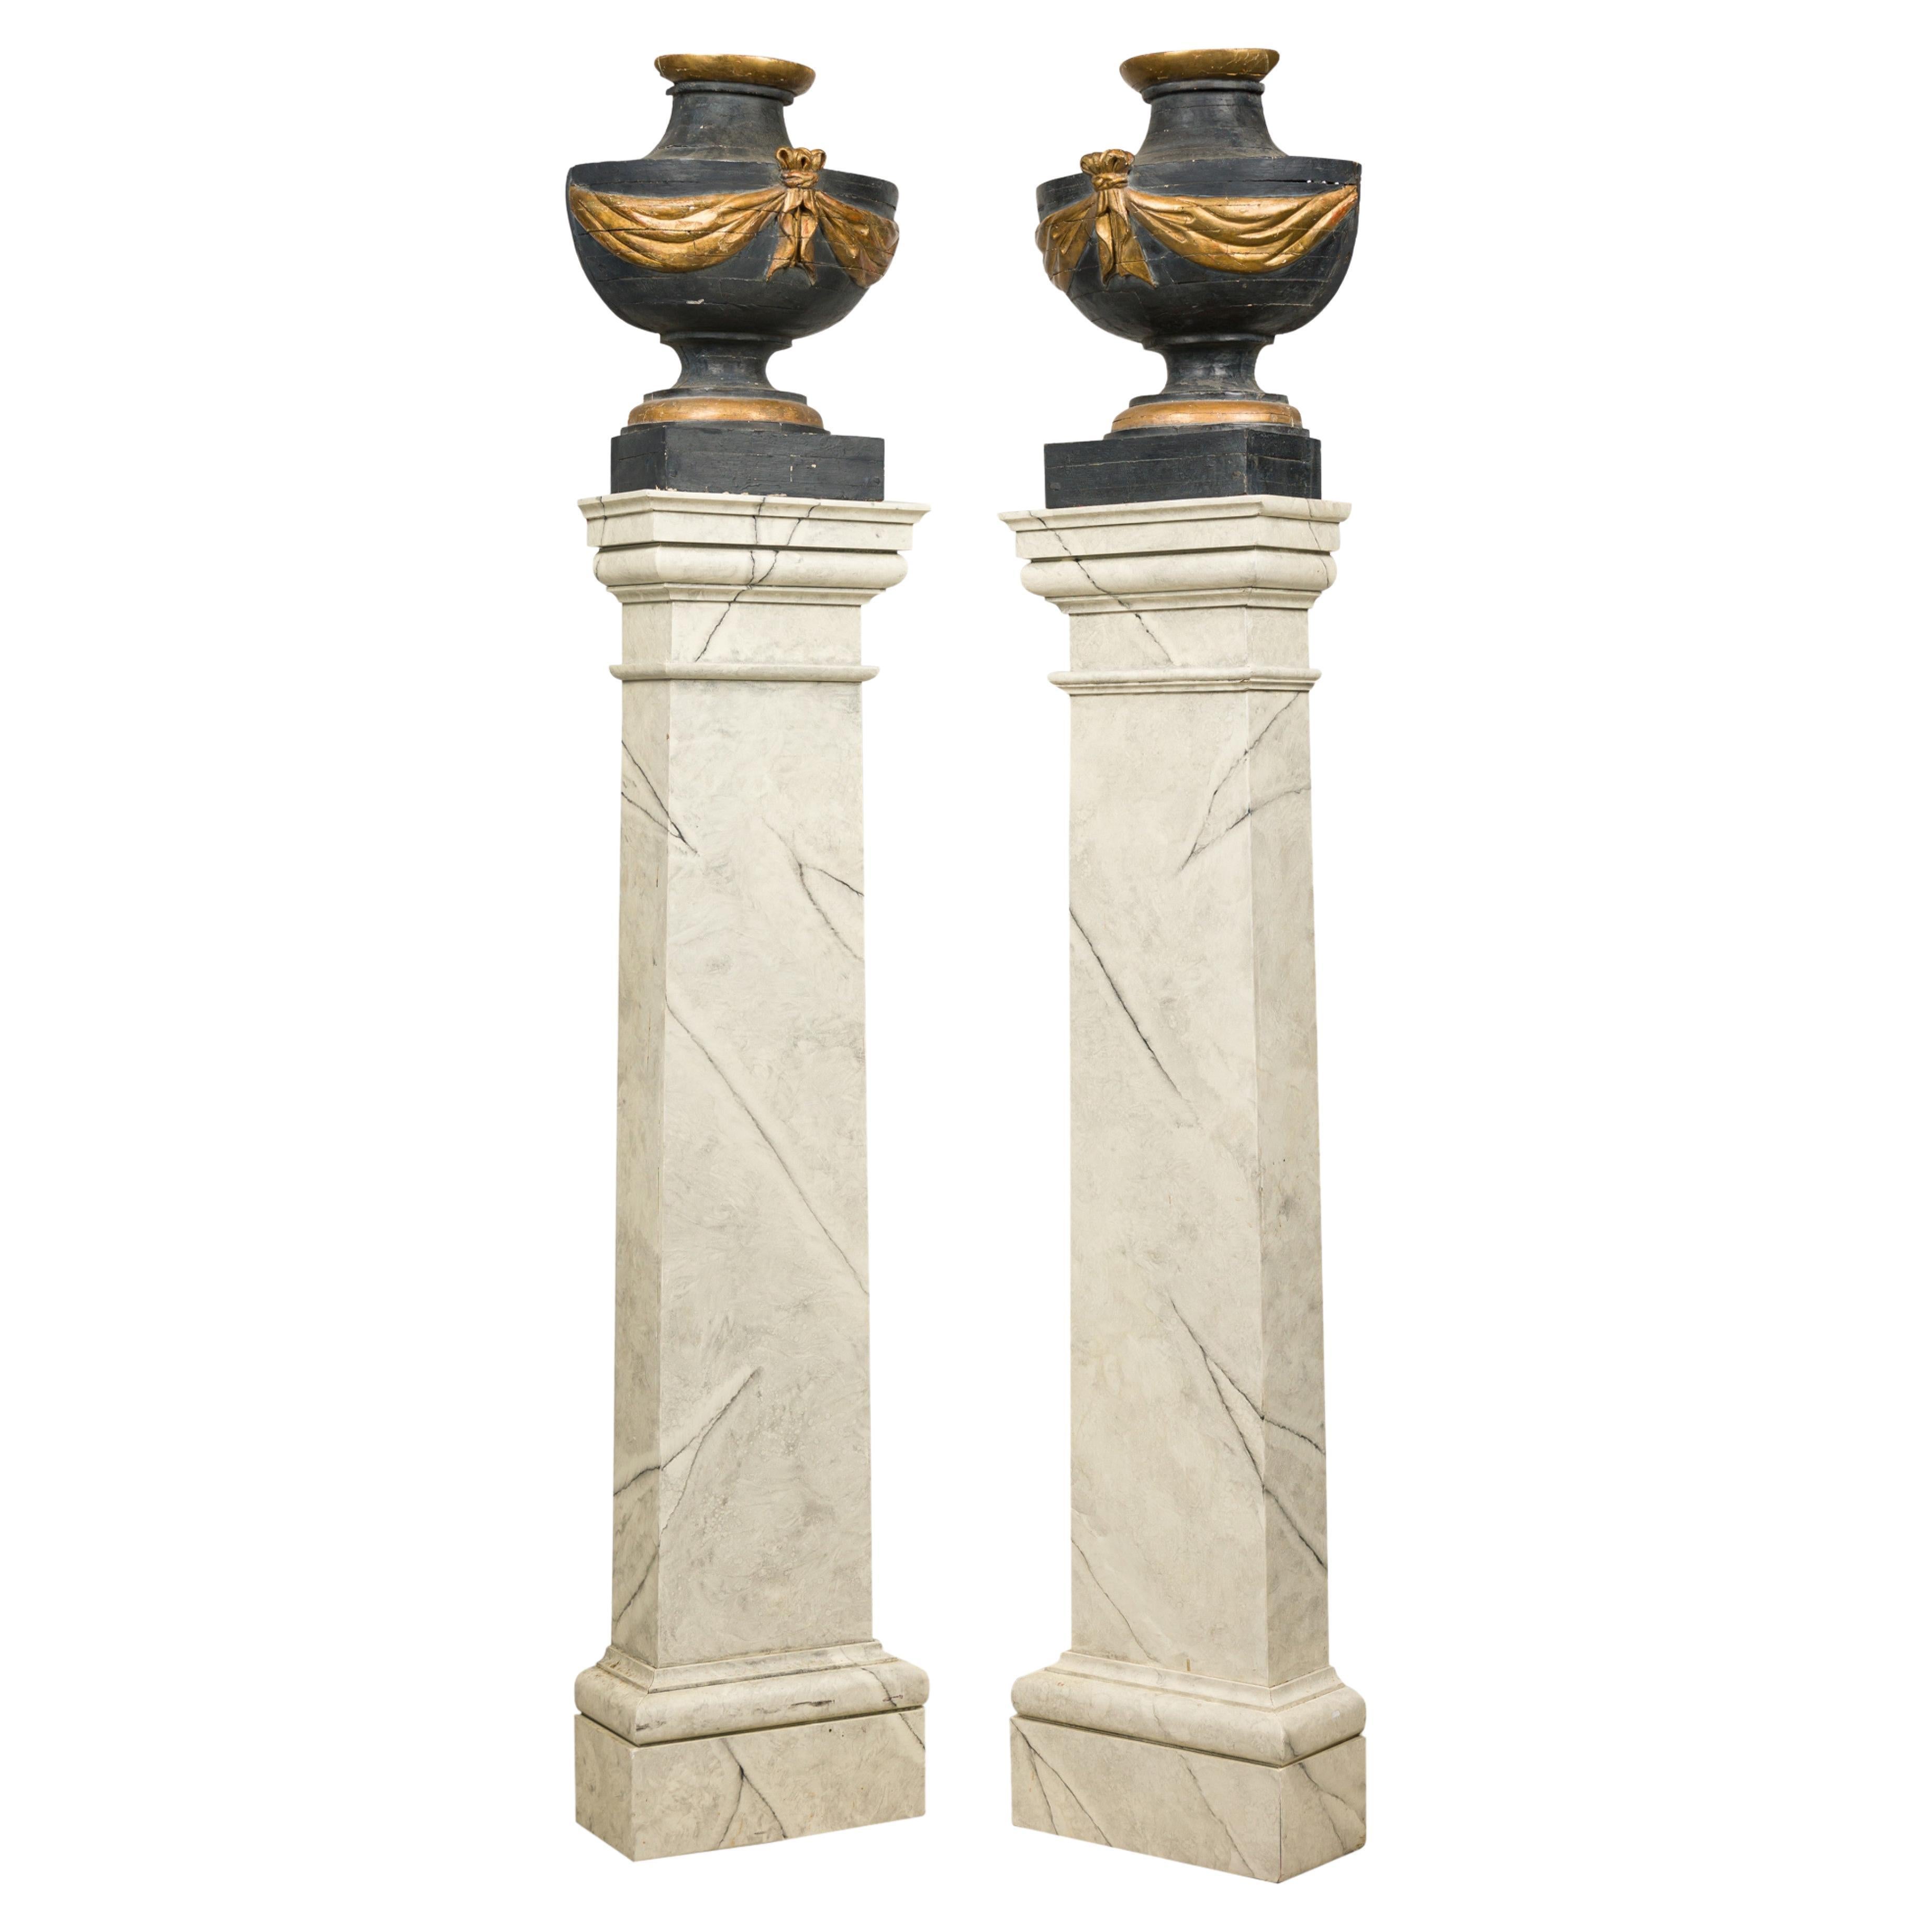 Pair of Italian Neoclassicalal Painted and Parcel-Gilt Urns on Pedestals